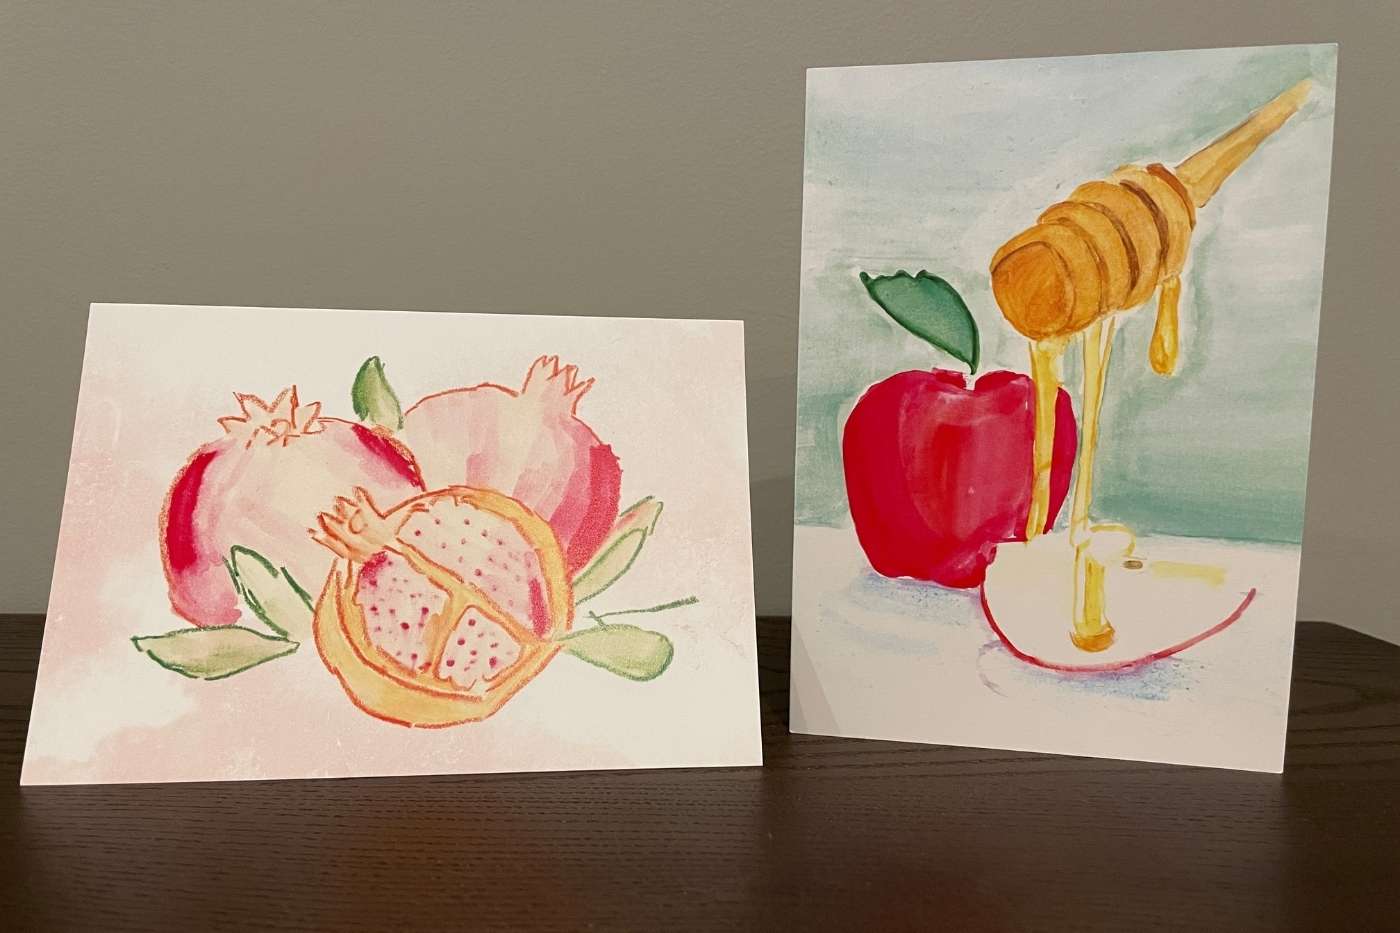 2 styles of Rosh Hashanah cards, one features a pomegranate and the other has apples with honey